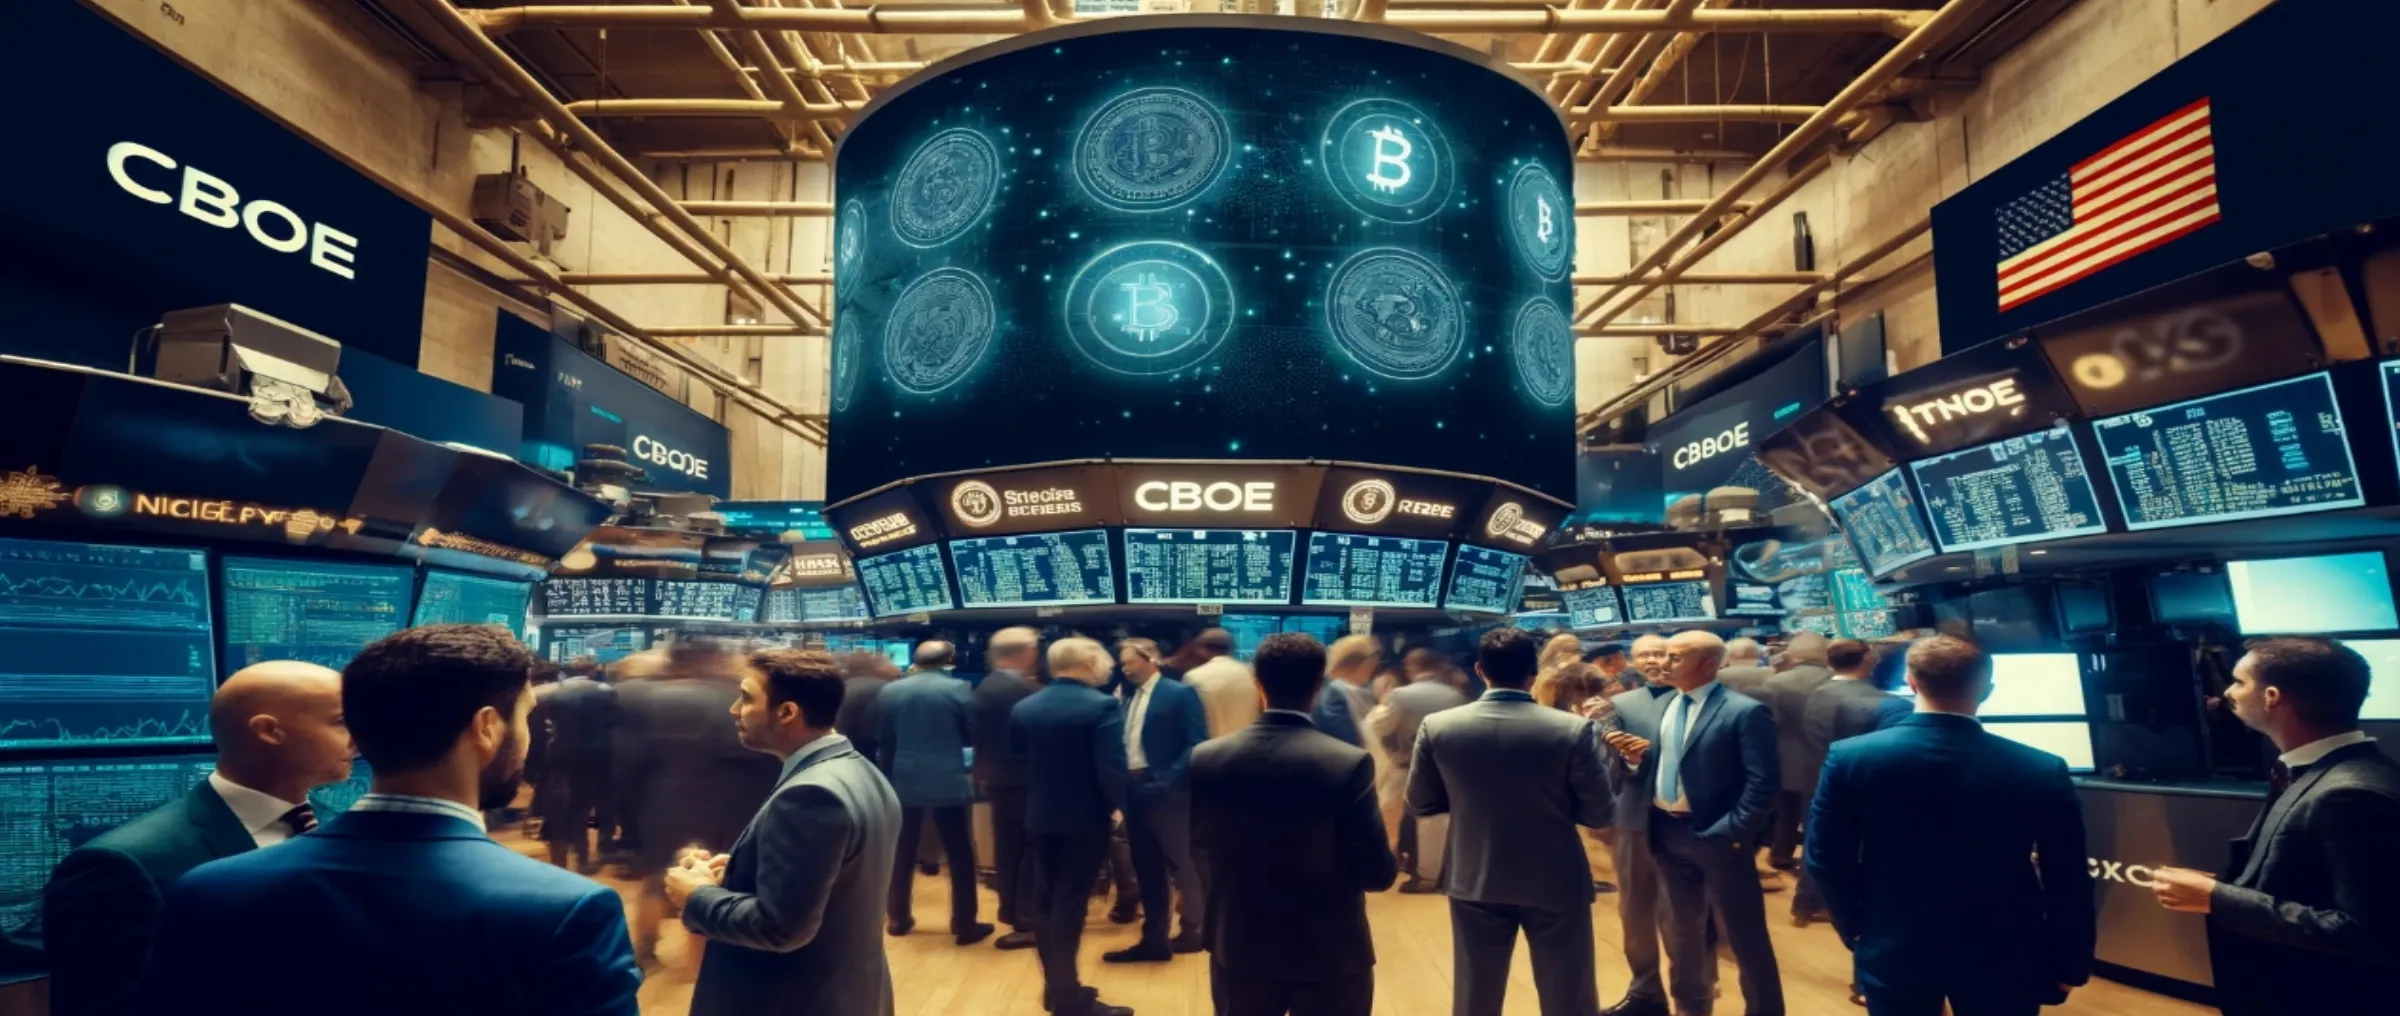 The Cboe Stock Exchange is going to stop trading cryptocurrencies